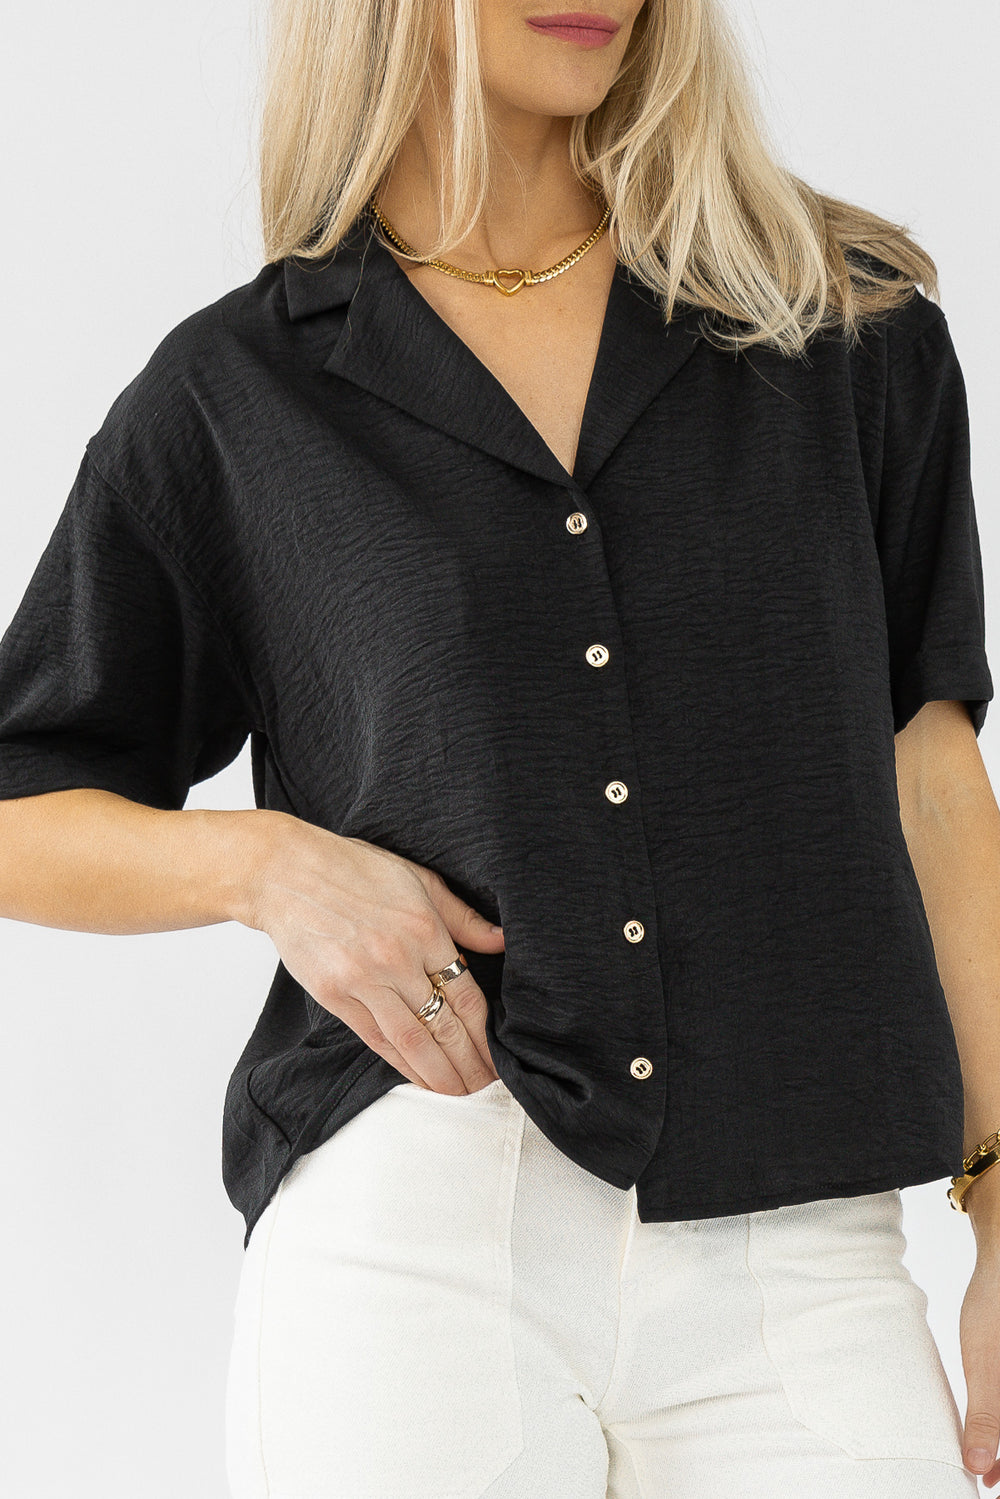 Chic Casual Everyday Tops, JO+CO